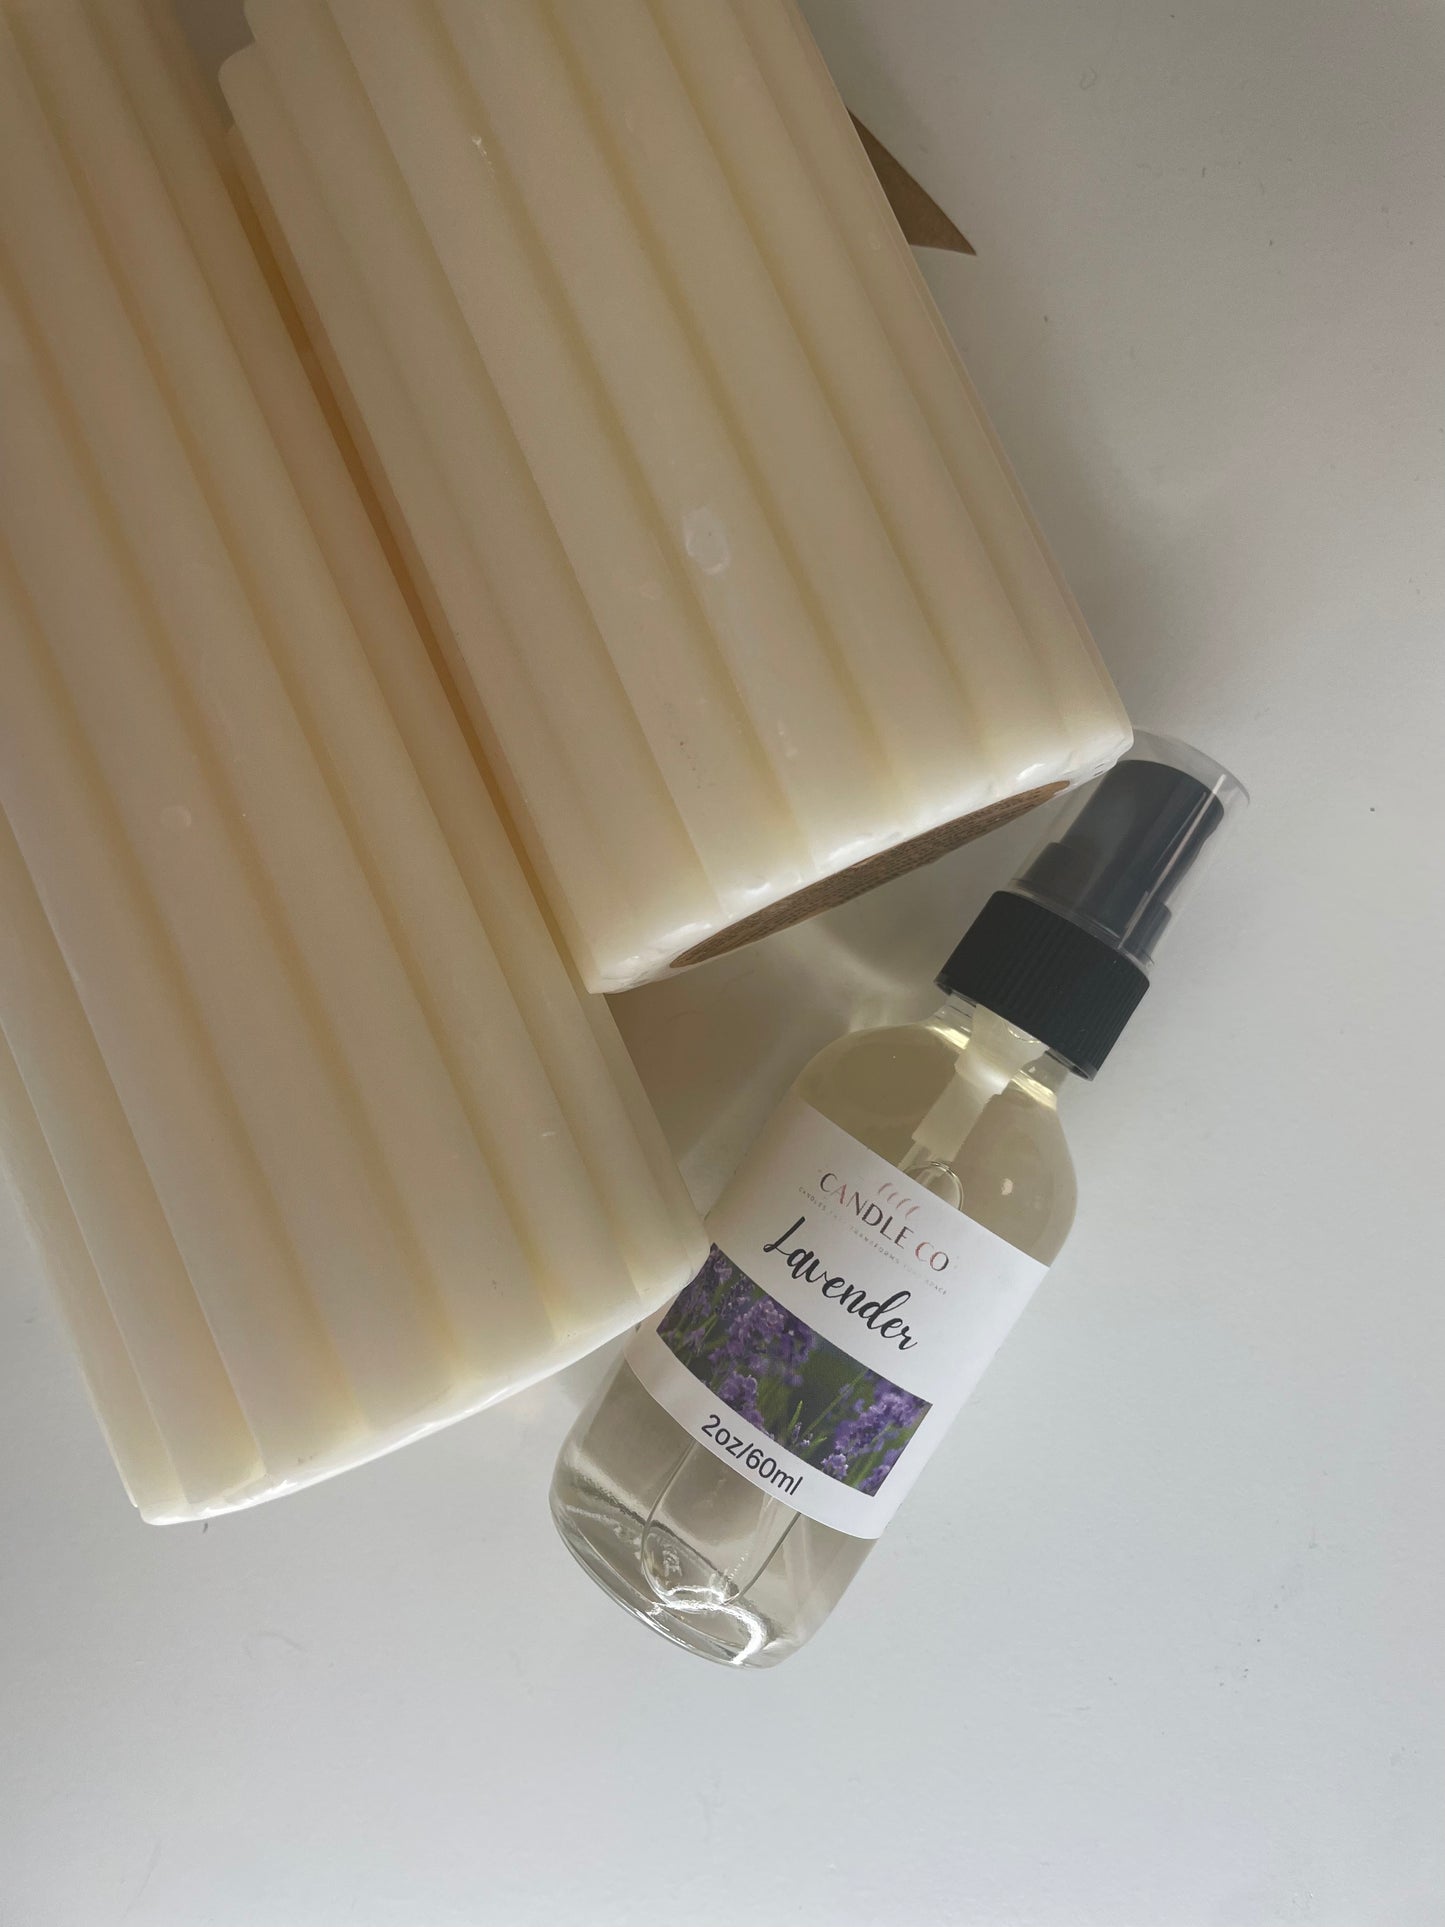 Lavender Linen/Room Spray that has a soothing aroma!